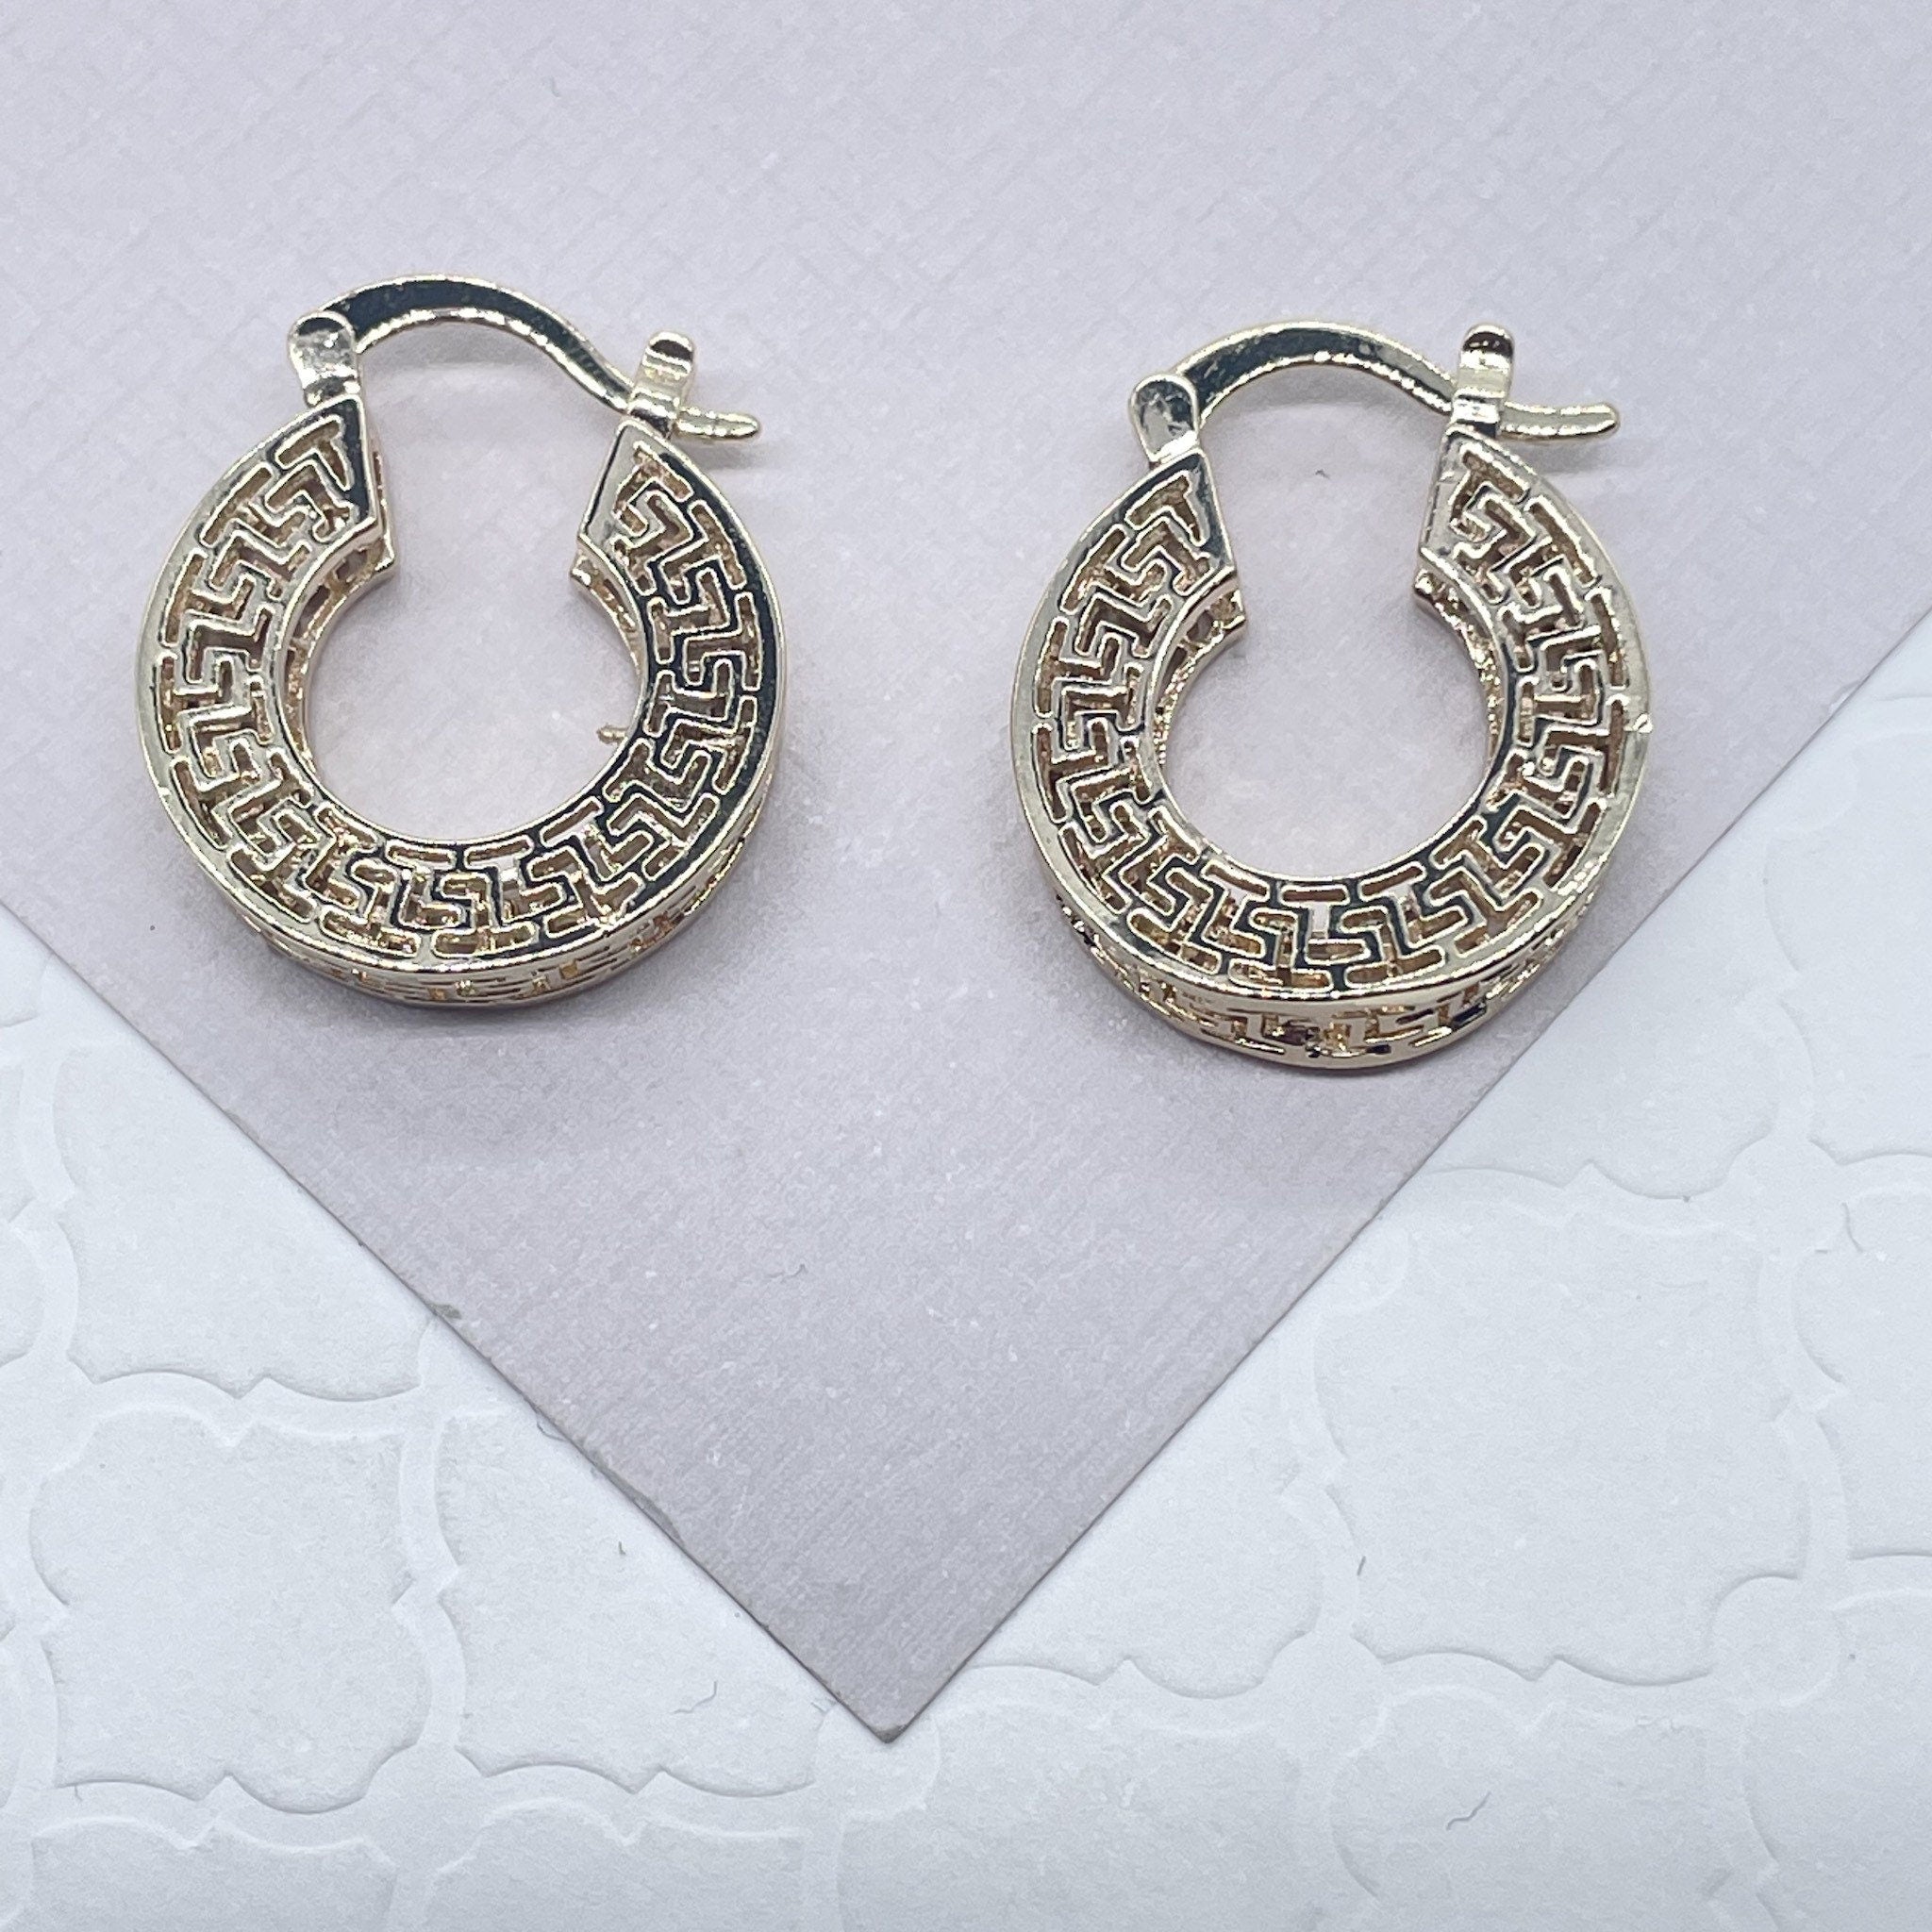 Amazon Collection 925 Sterling Silver 29mm Balinese Beaded Hoop Earrings  for Women : Clothing, Shoes & Jewelry - Amazon.com